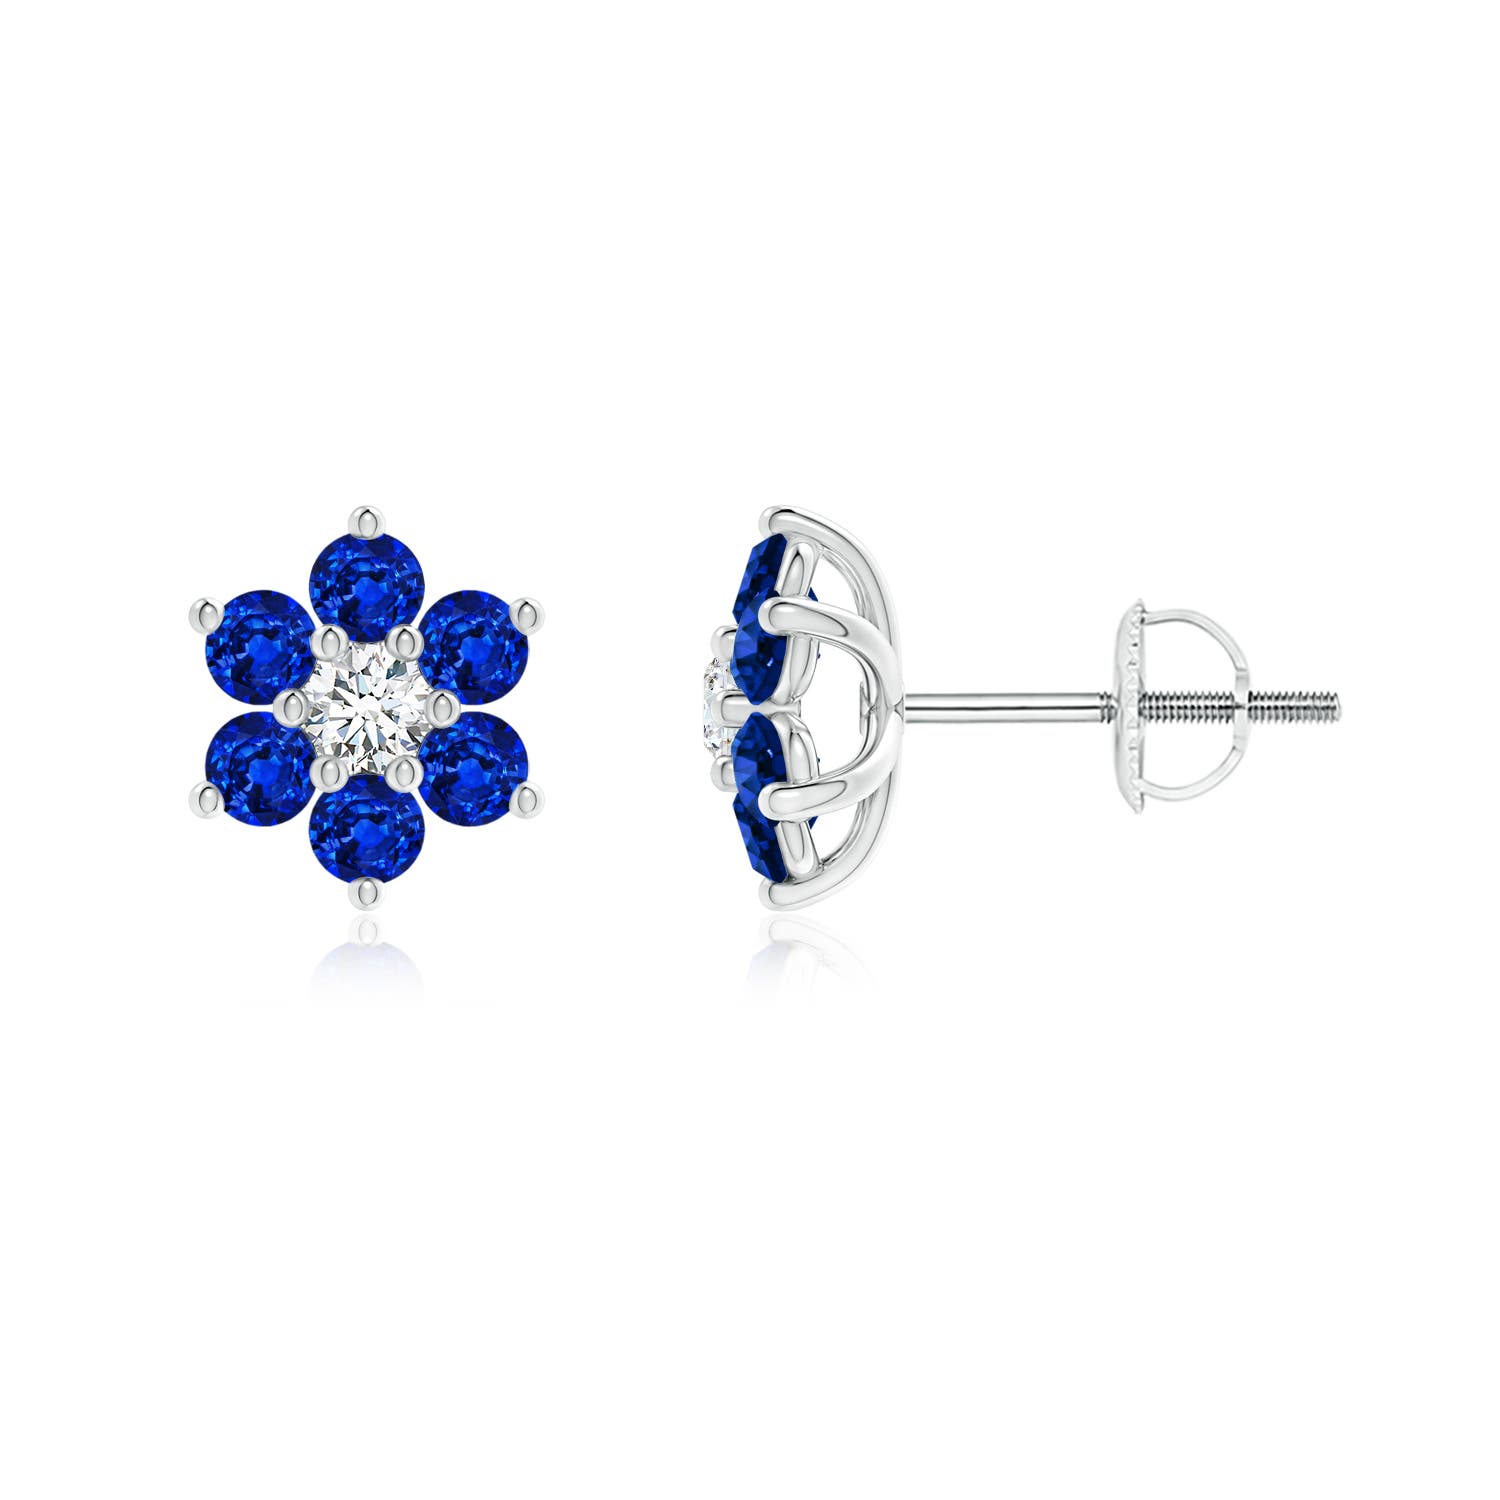 3 Ct Blue Sapphire Stud Earrings In White Gold (6.4 mm)